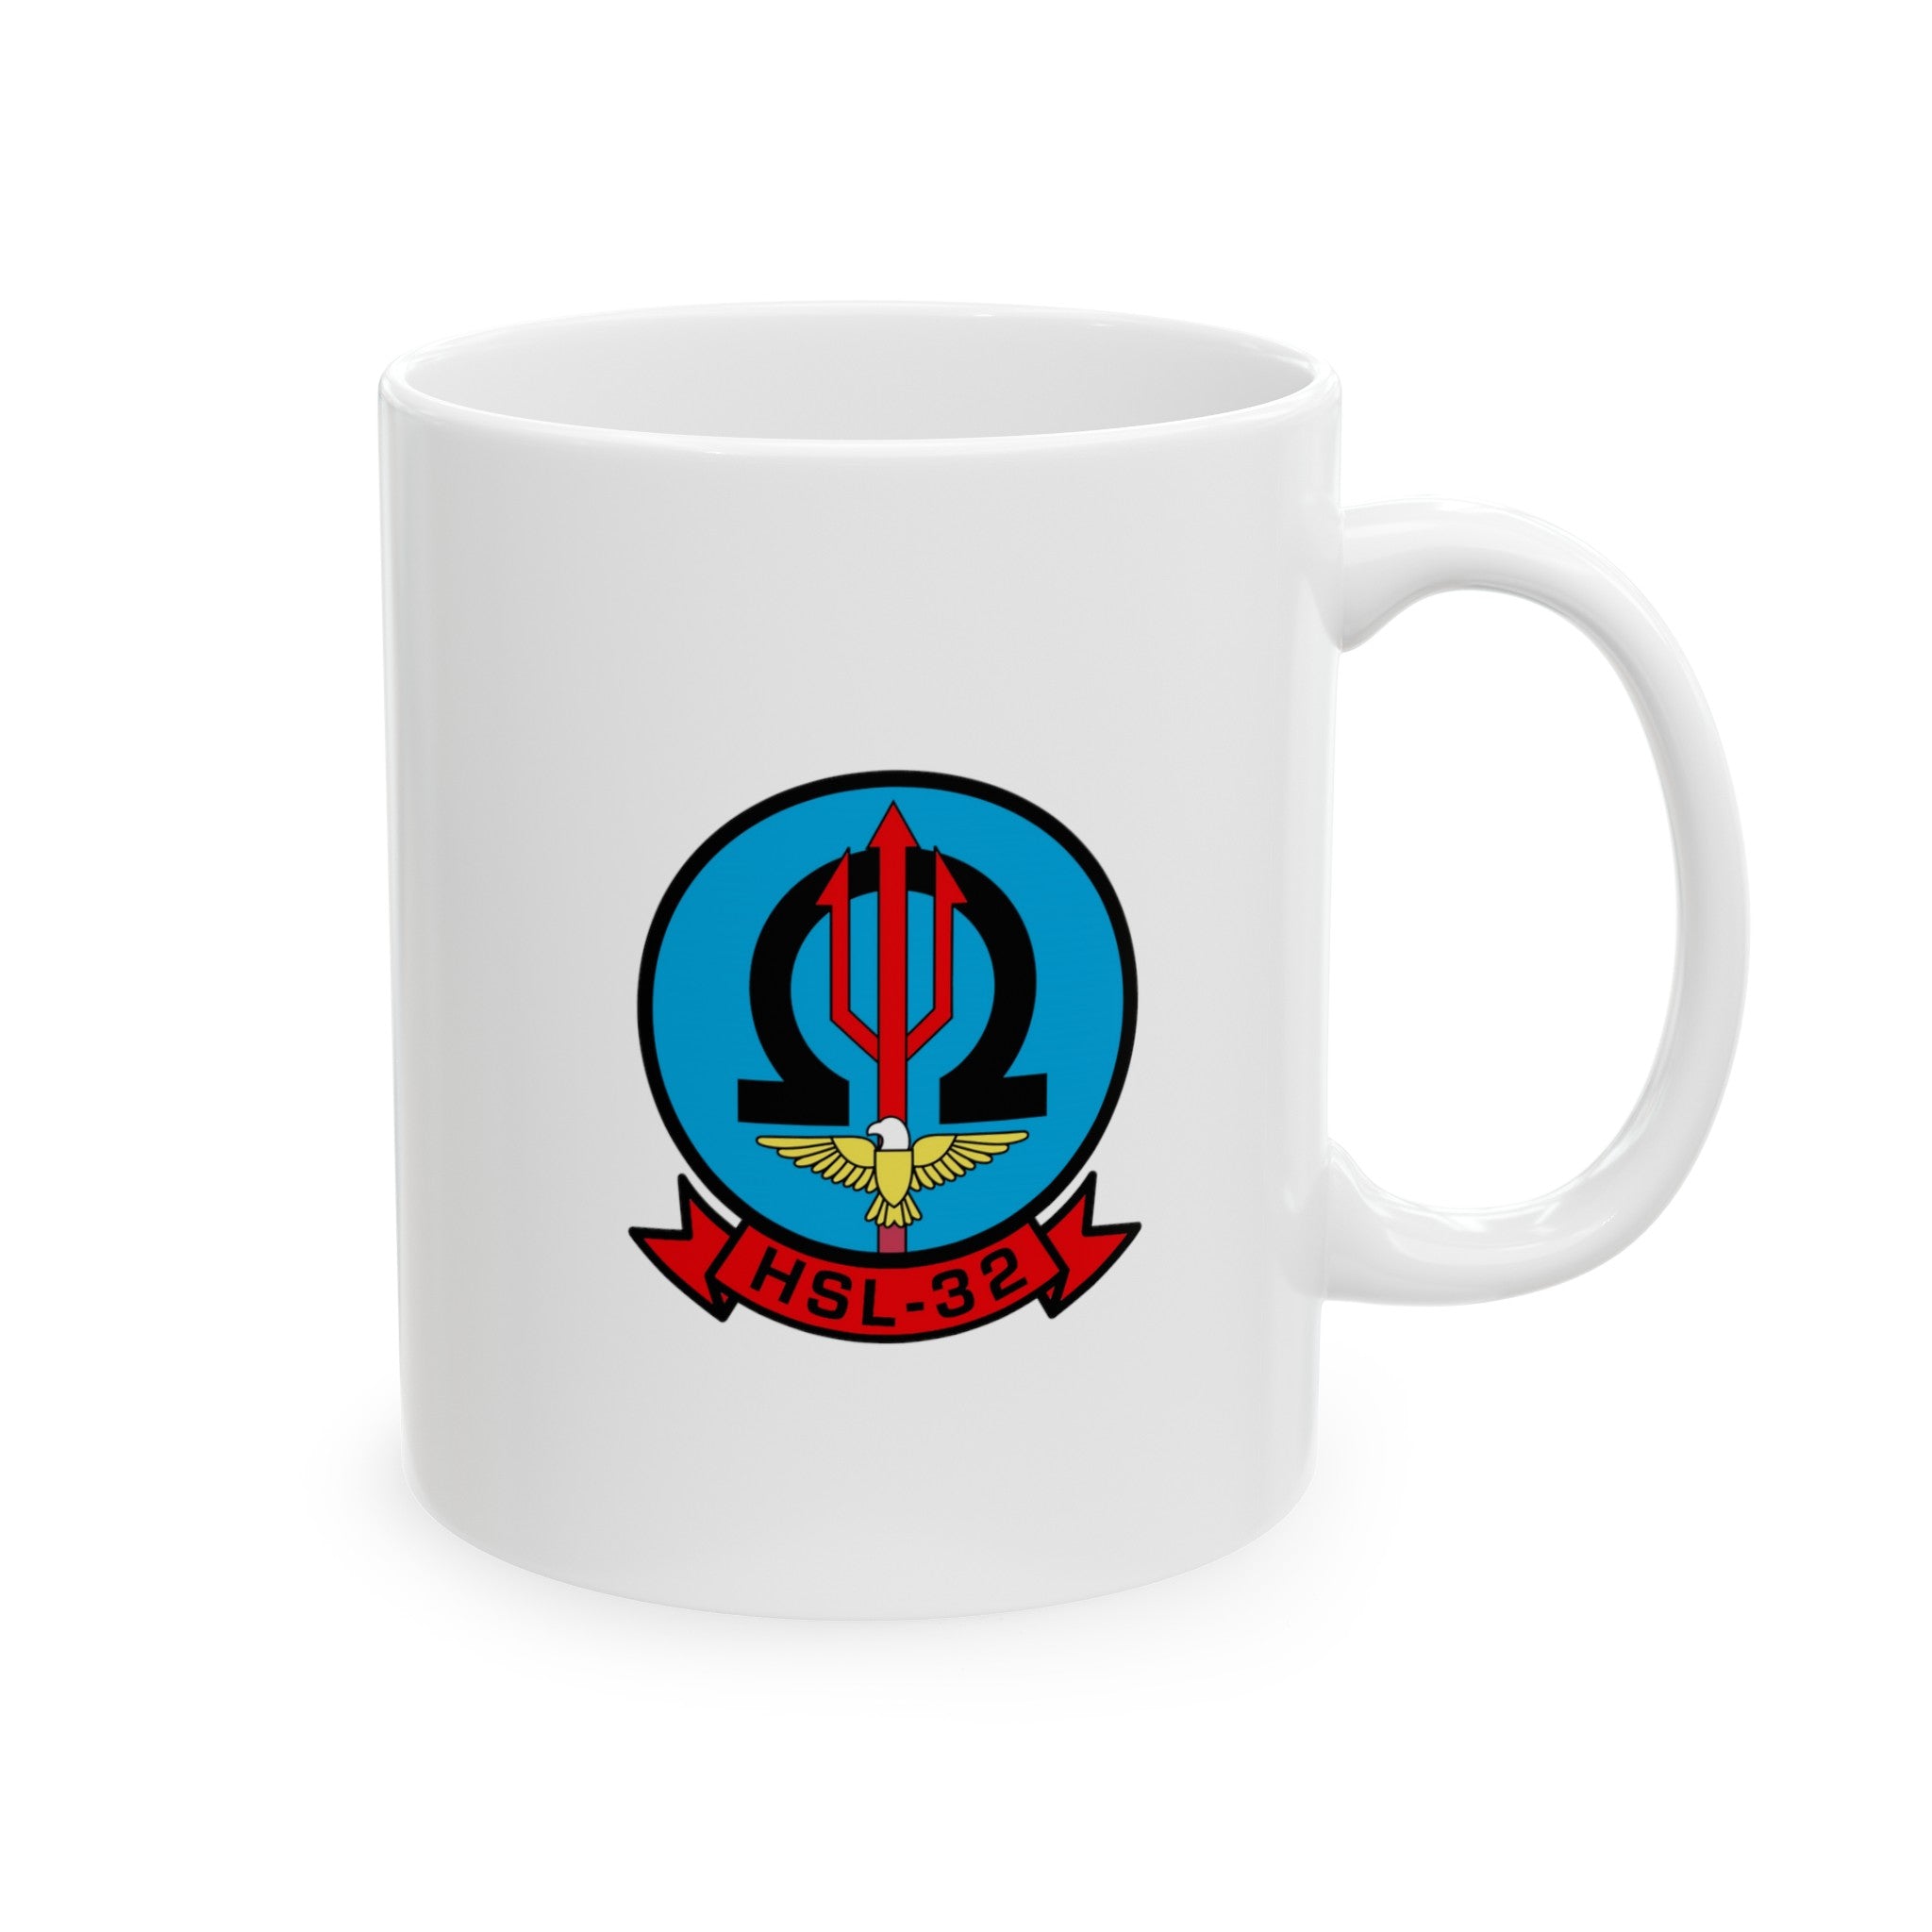 HSL-32 "Invaders" Aircrewman Mug, Navy, Helicopter ASW Squadron Light flying the SH-2 Seasprite